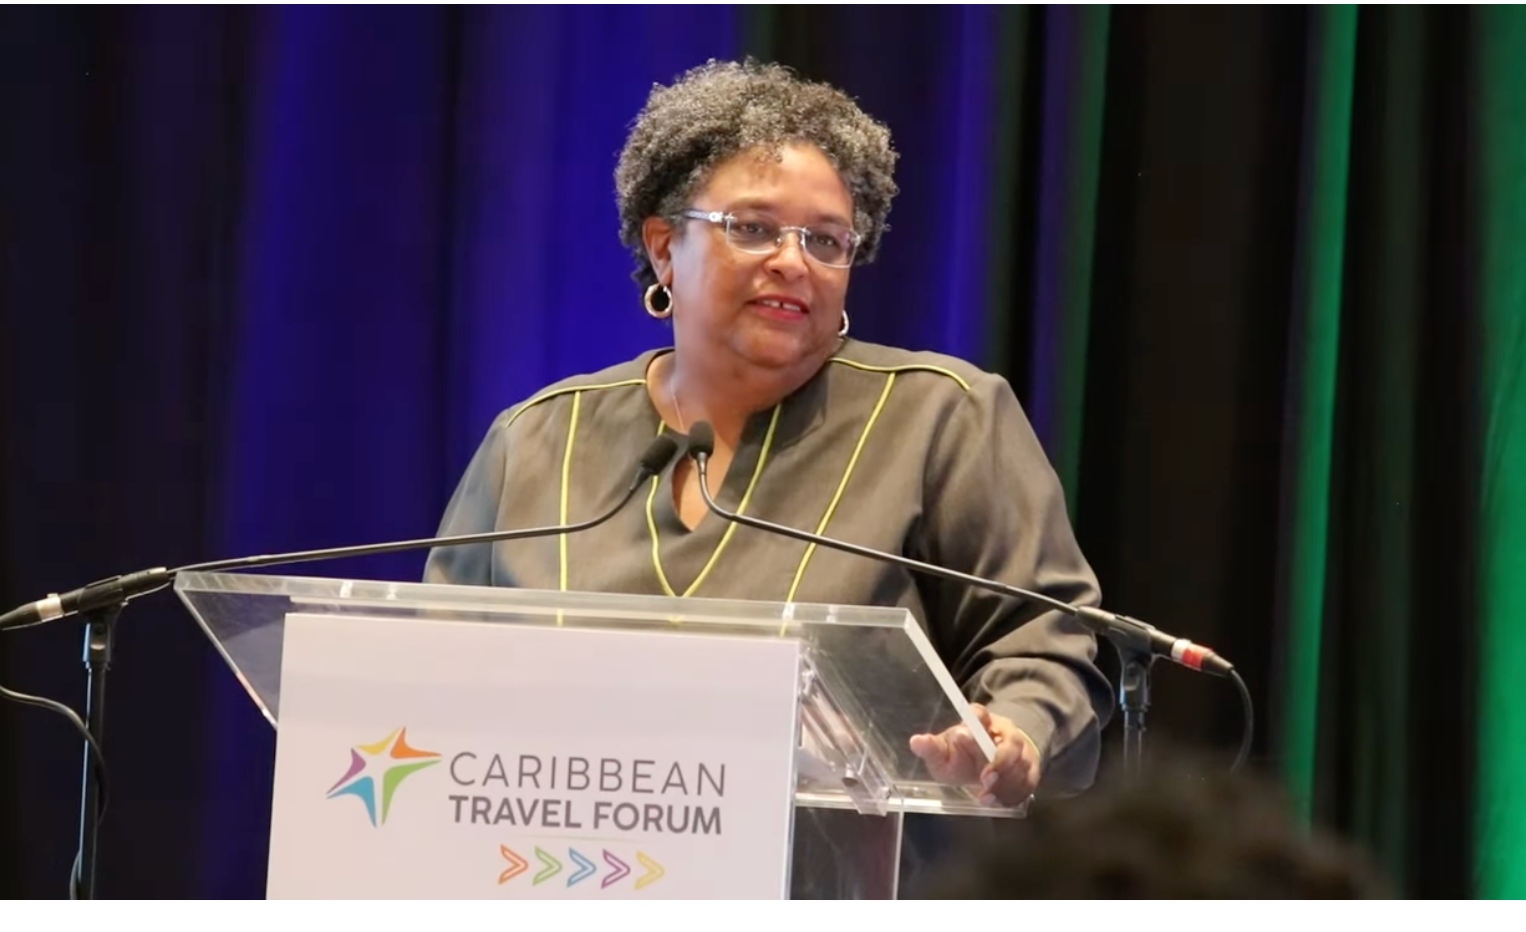 "Emancipate Yourself": Prime Minister Mia Mottley Calls On Caribbean Leaders To Shape Their Own Destiny In Inspiring Speech